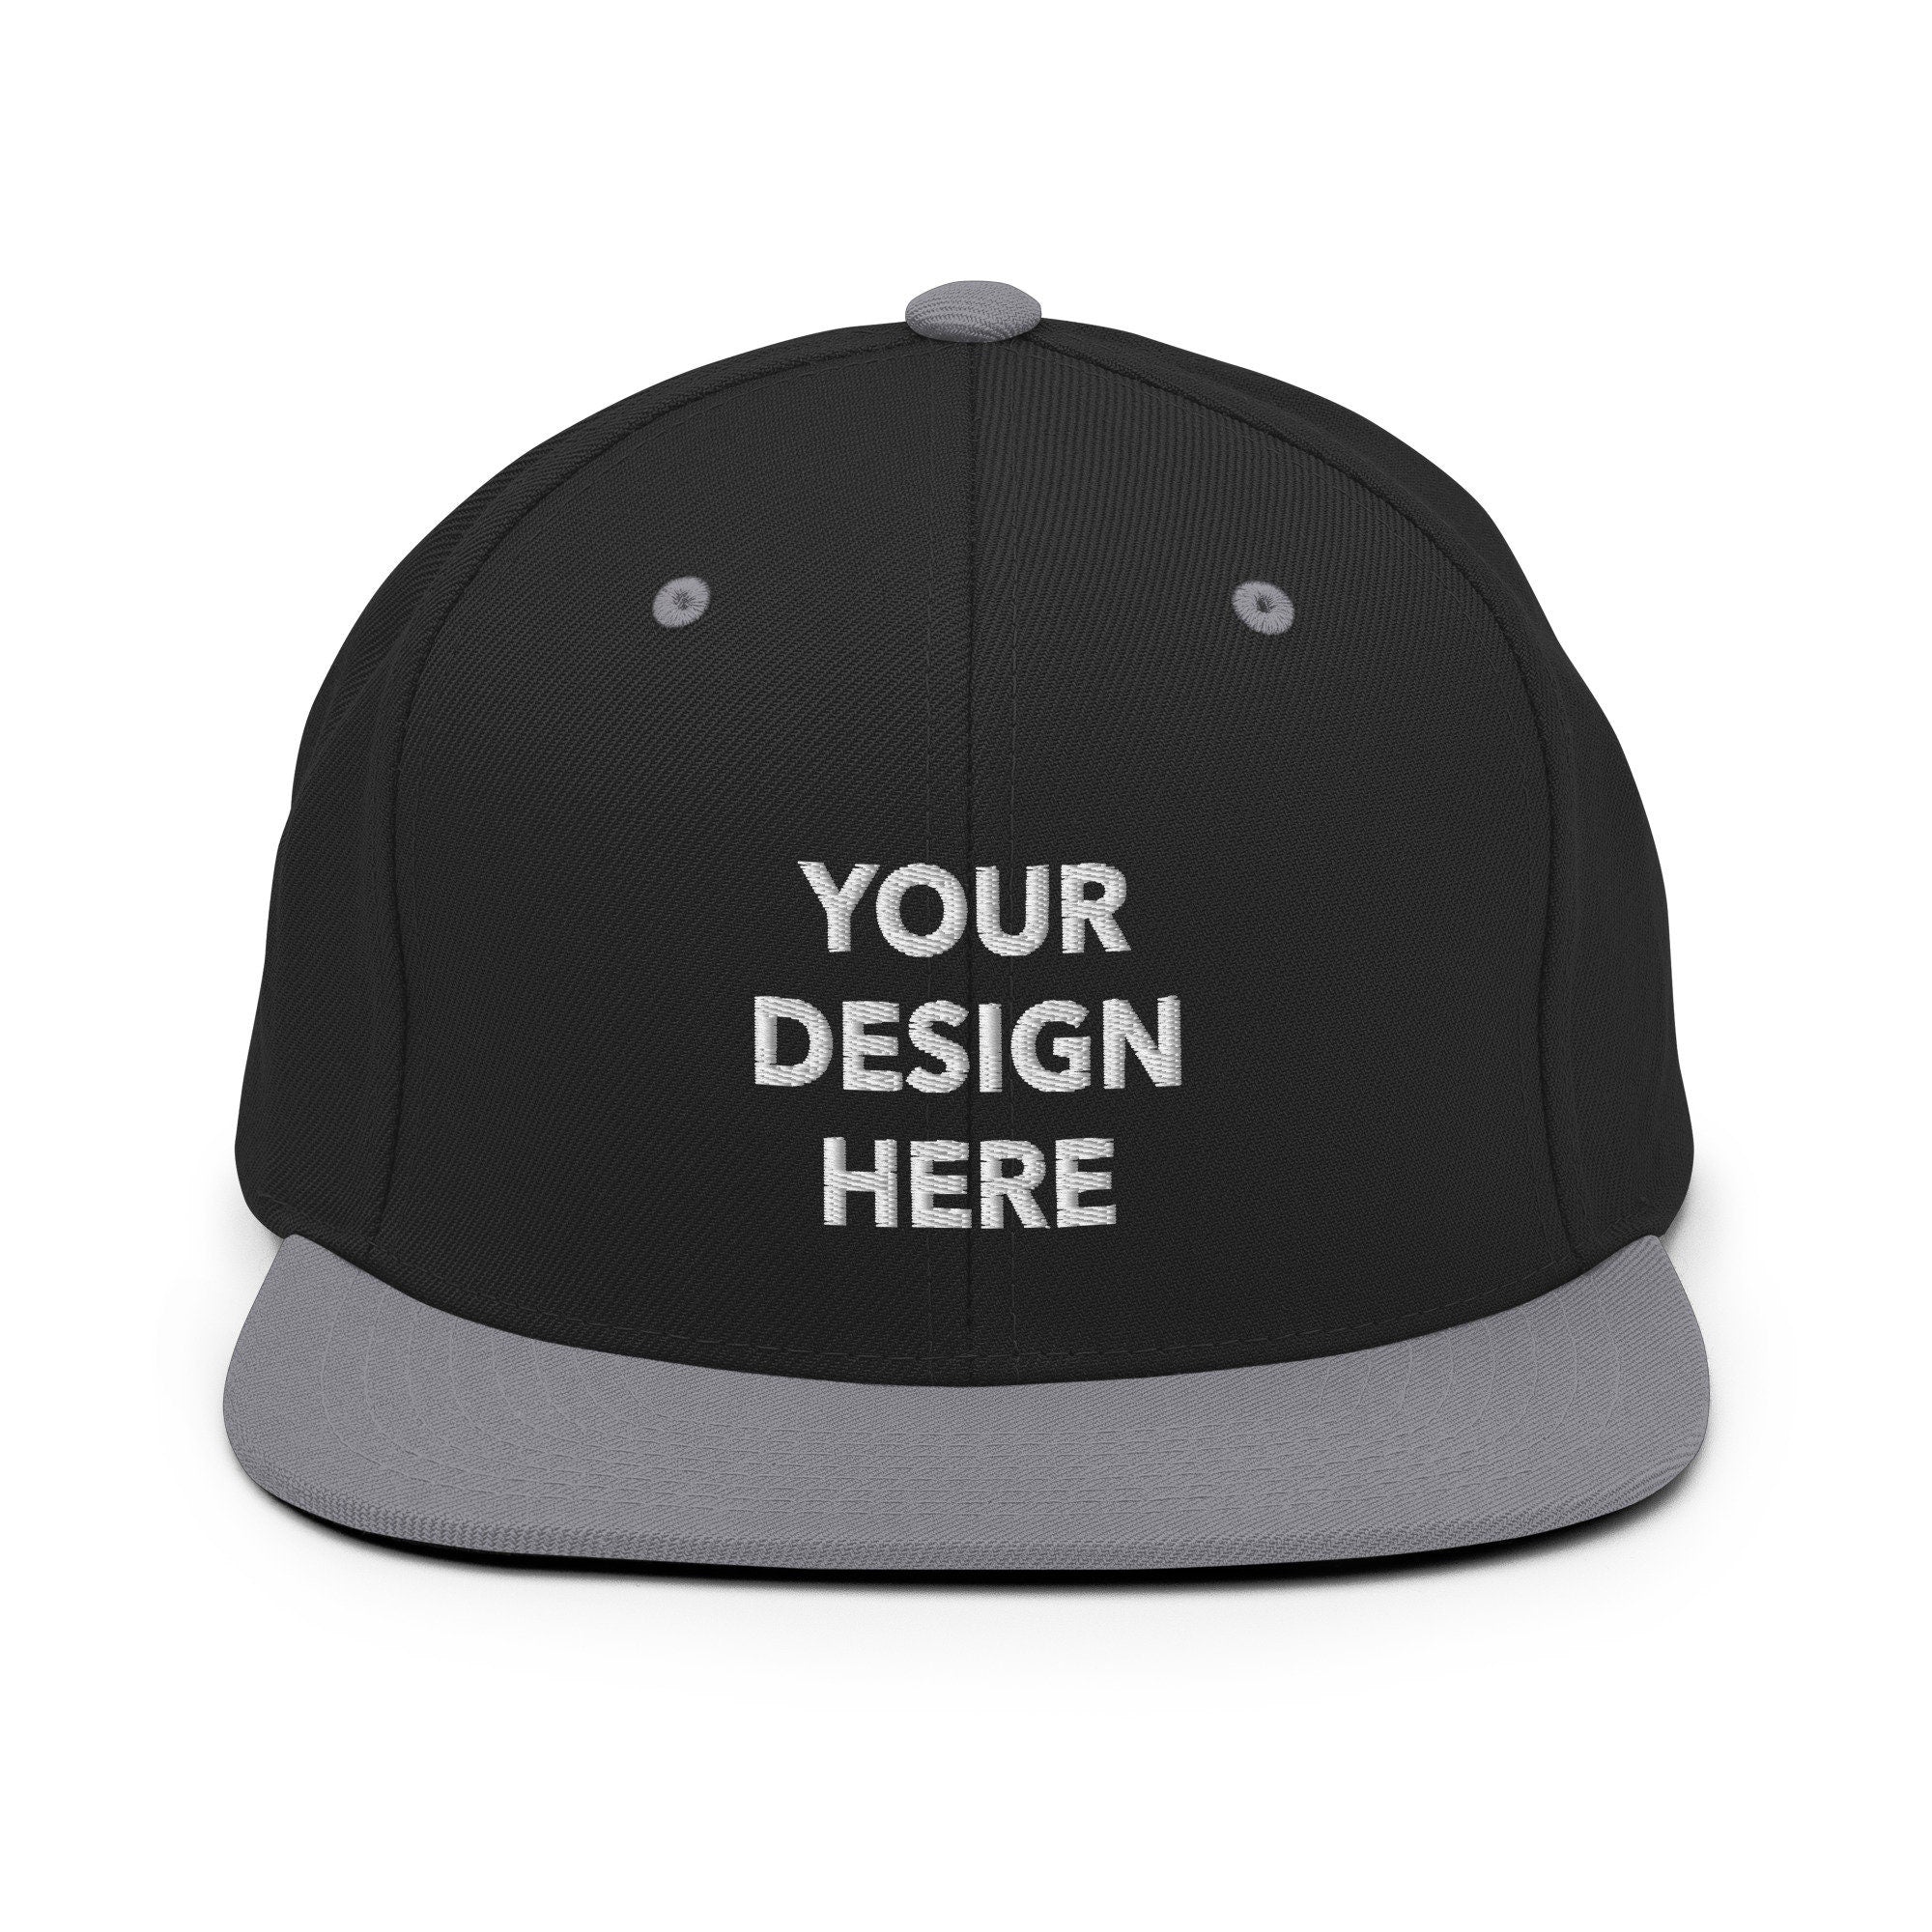 Personalized Embroidered Snapback Hat, Customized Logo Snapback Hat, Embroidery With Your Own Text or Design, Handmade Snapback Hat